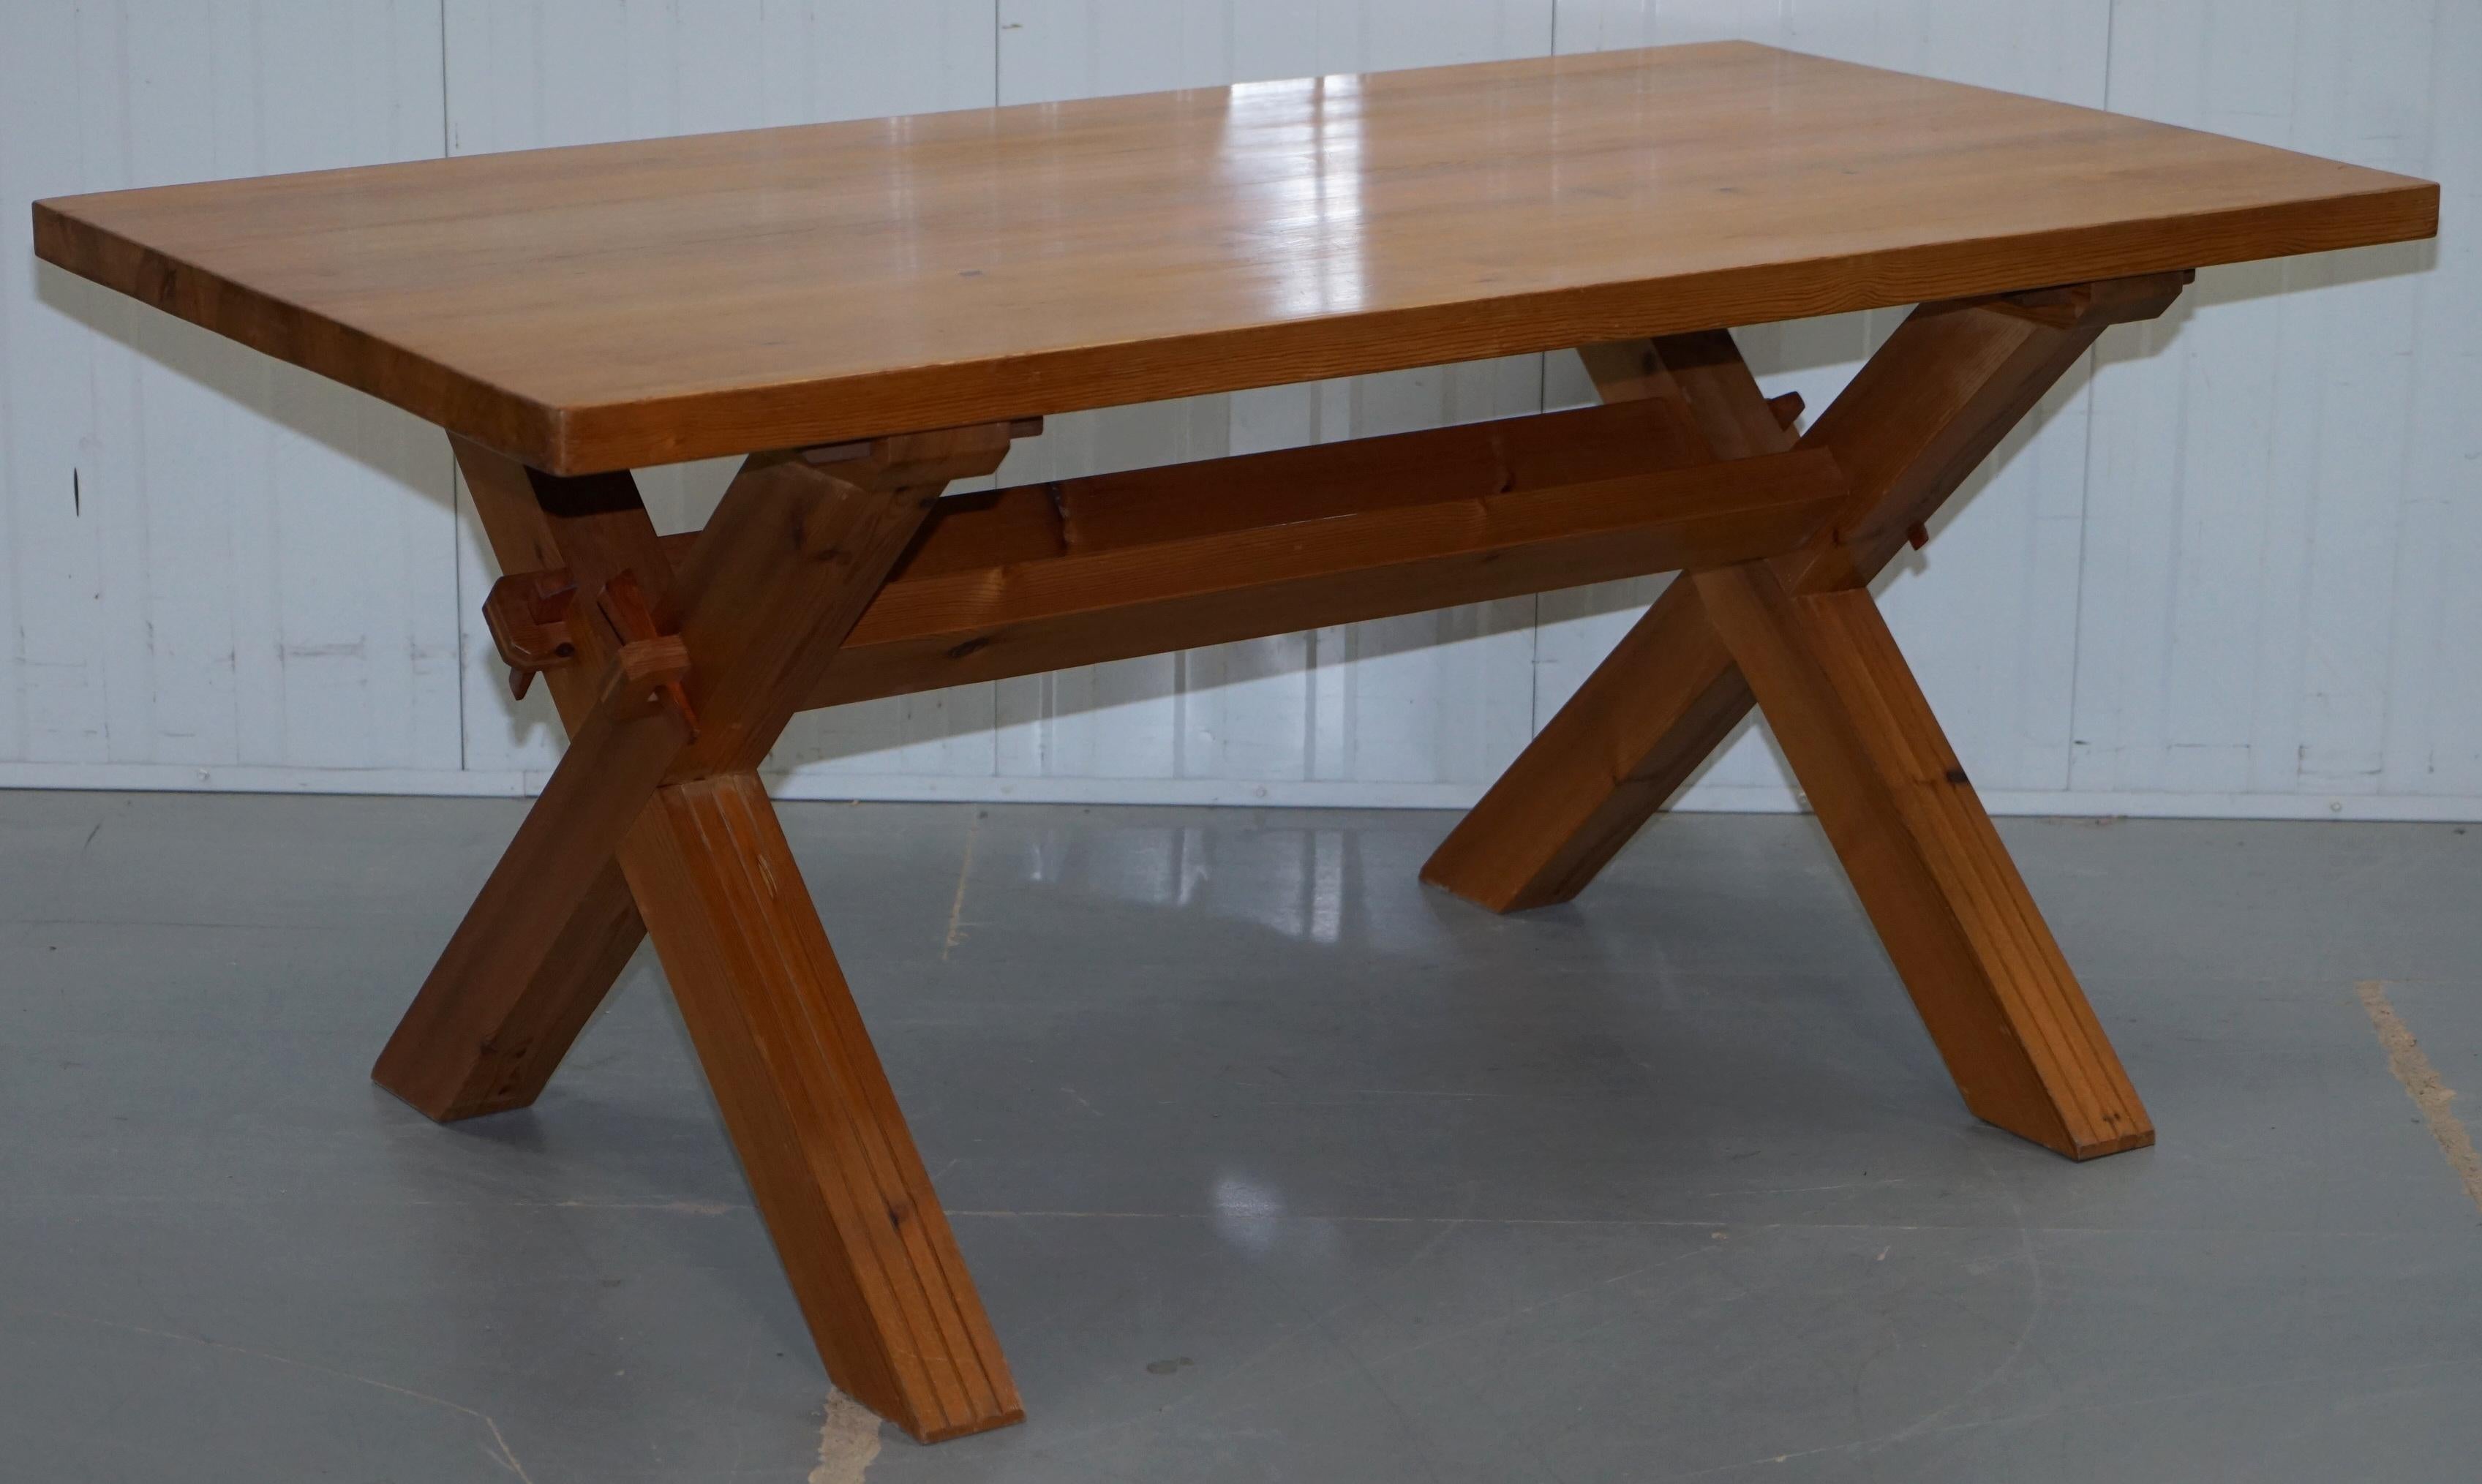 We are delighted to offer for sale this Robert Nance of St Ives handmade pine dining table and six chairs

A decorative good looking and well made set, the chairs are especially artistic, I love the handles in the back

We have cleaned waxed and